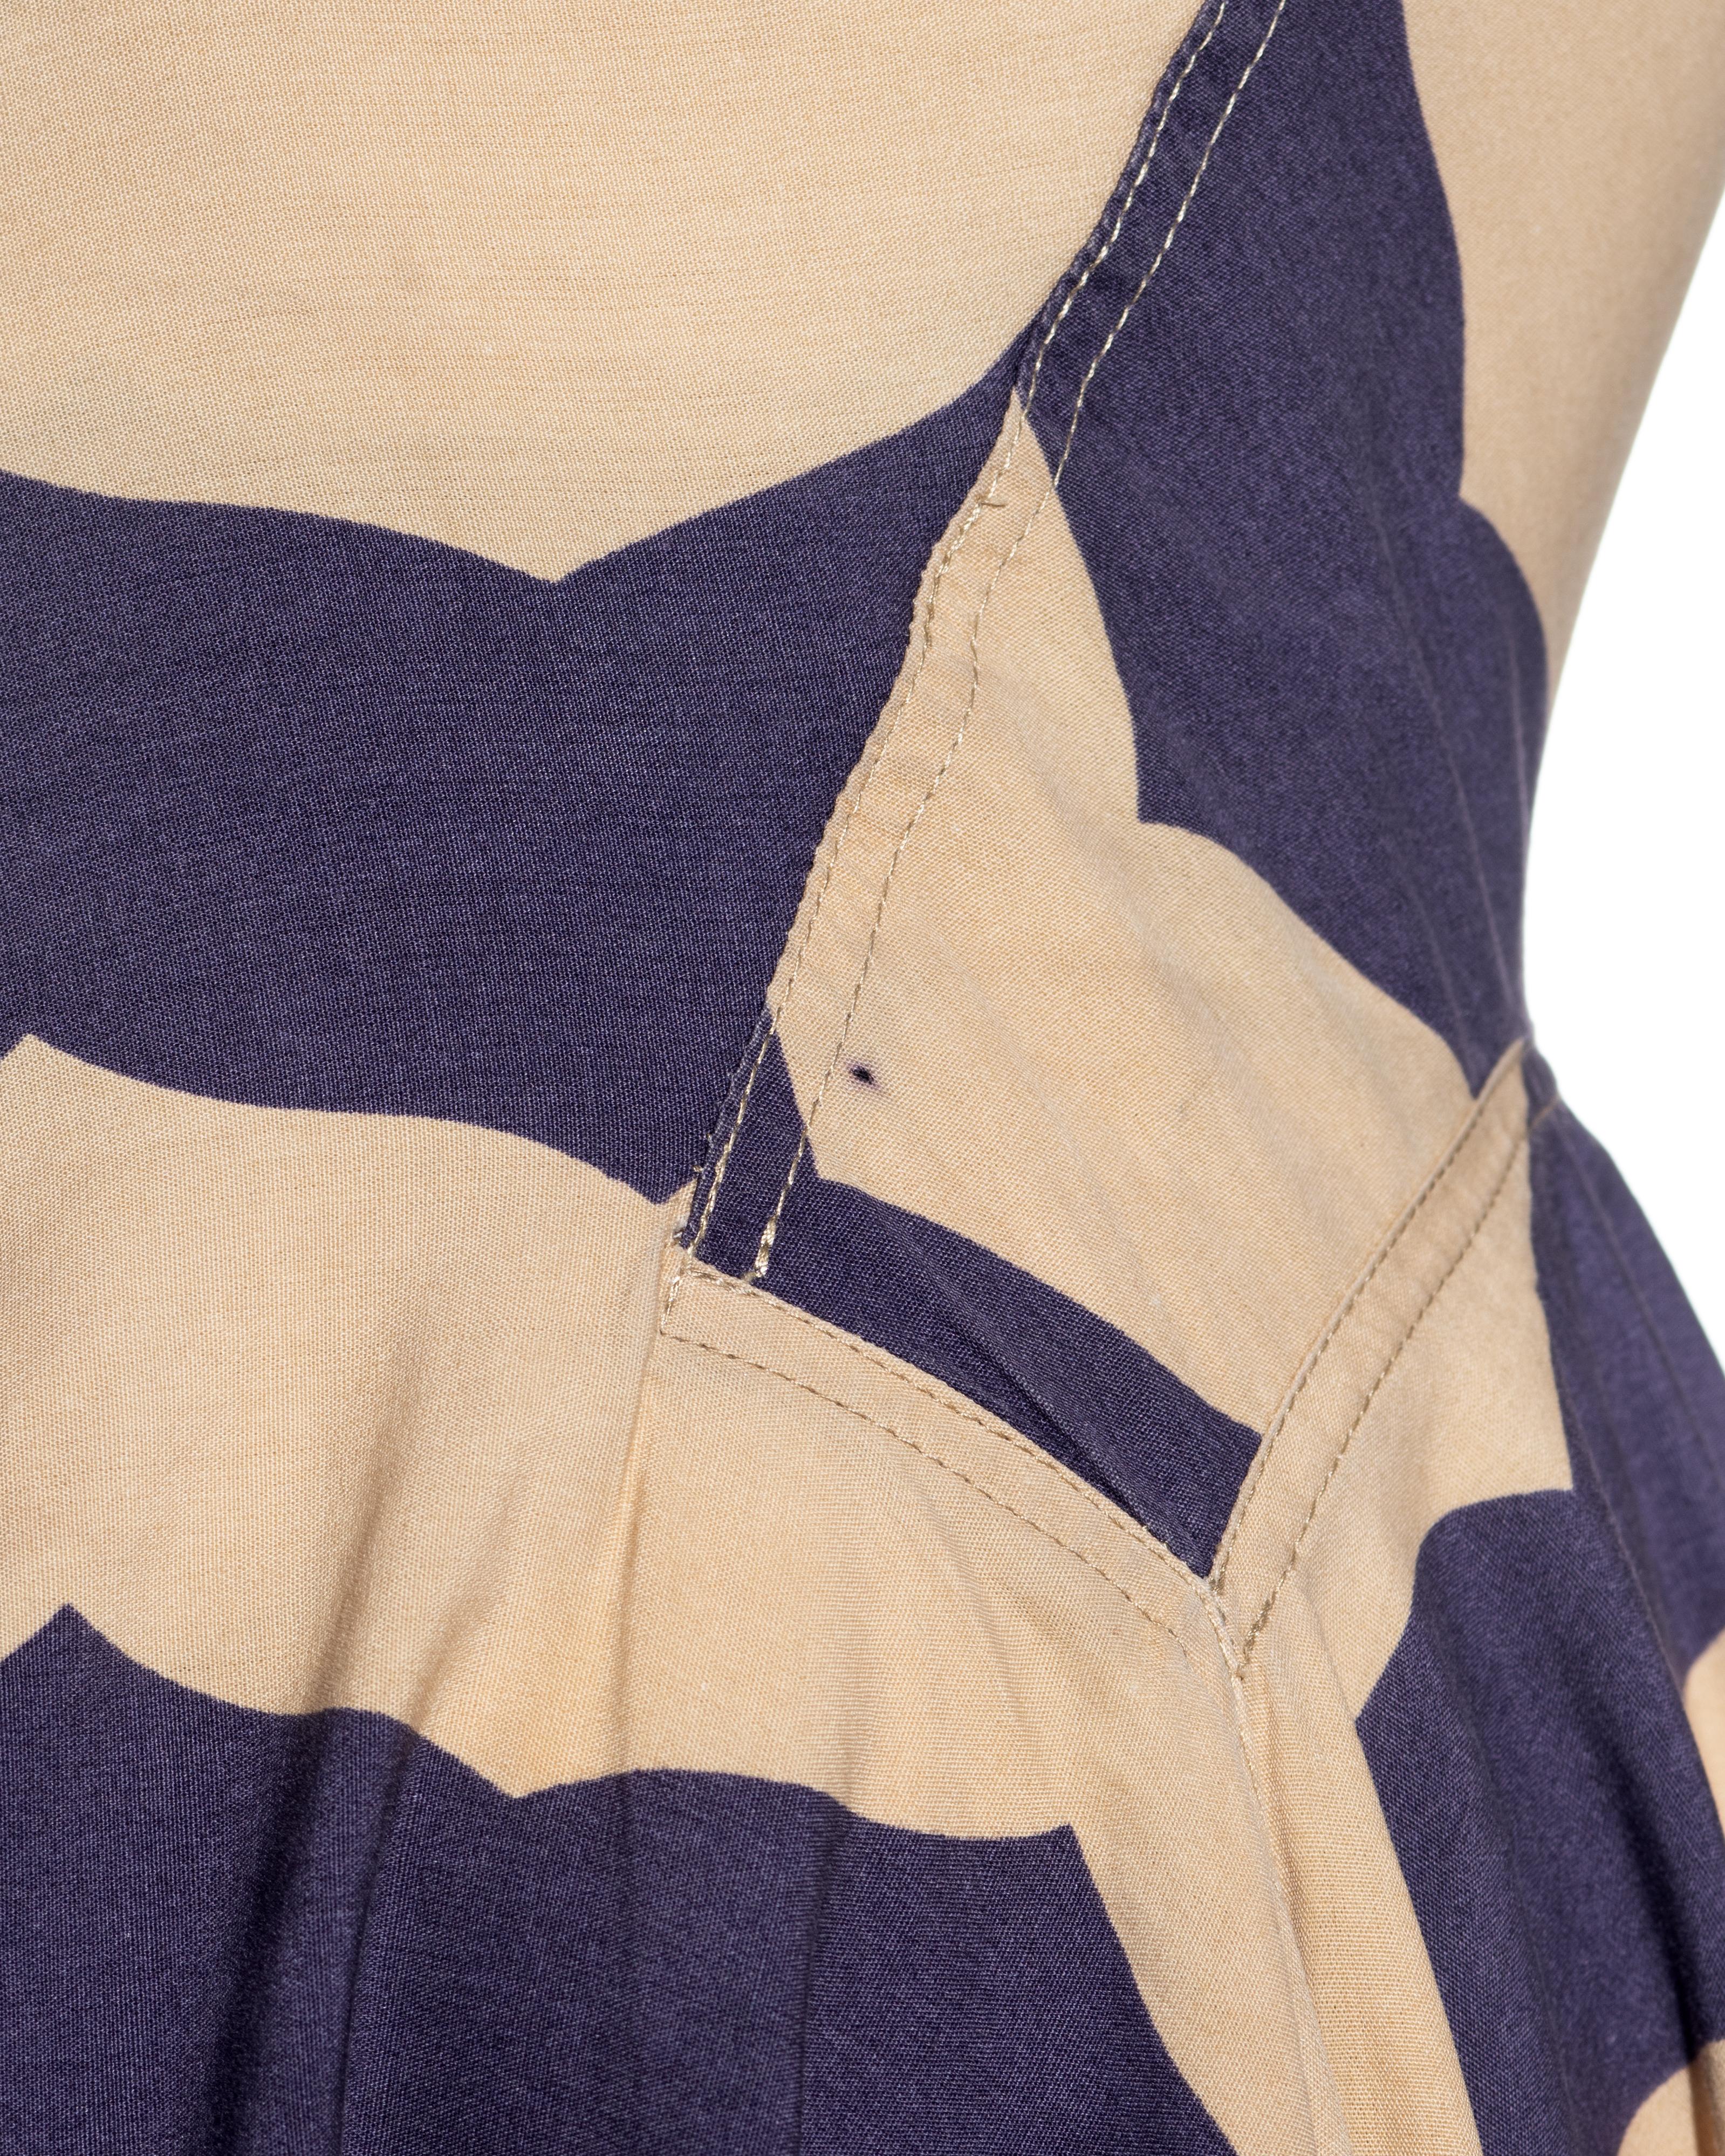 Azzedine Alaia purple and beige striped cotton dress with cut out, ss 1990 For Sale 4